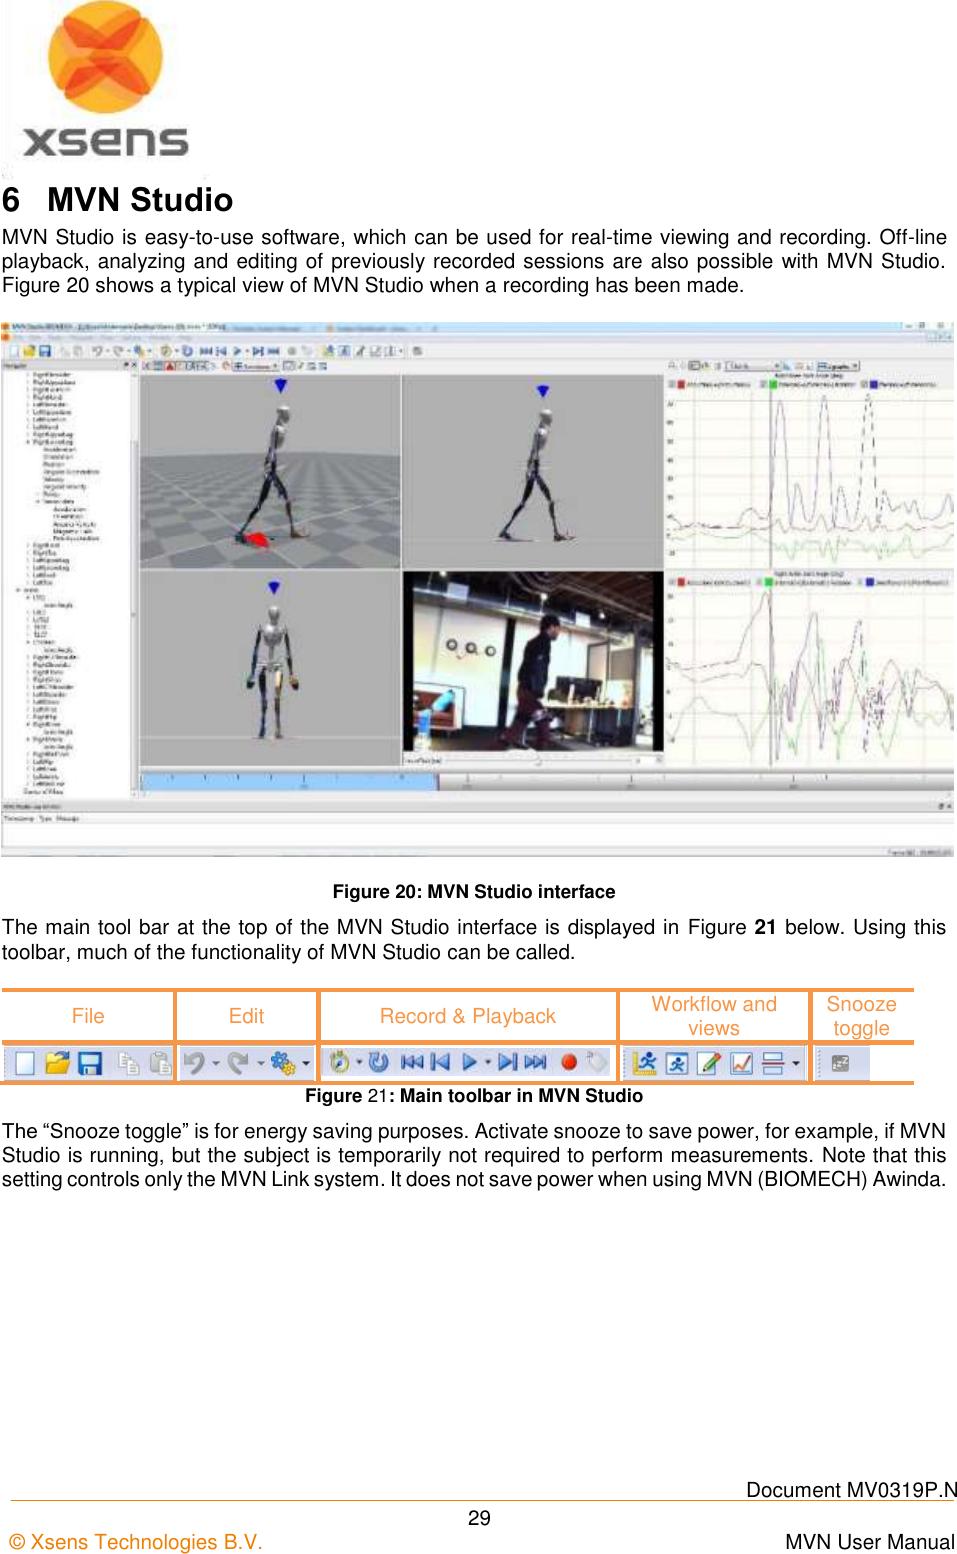    Document MV0319P.N © Xsens Technologies B.V.      MVN User Manual  29 6  MVN Studio MVN Studio is easy-to-use software, which can be used for real-time viewing and recording. Off-line playback, analyzing and editing of previously recorded sessions are also possible with MVN Studio. Figure 20 shows a typical view of MVN Studio when a recording has been made.  Figure 20: MVN Studio interface The main tool bar at the top of the MVN Studio interface is displayed in Figure 21 below. Using this toolbar, much of the functionality of MVN Studio can be called.  File Edit Record &amp; Playback Workflow and views Snooze toggle      Figure 21: Main toolbar in MVN Studio The “Snooze toggle” is for energy saving purposes. Activate snooze to save power, for example, if MVN Studio is running, but the subject is temporarily not required to perform measurements. Note that this setting controls only the MVN Link system. It does not save power when using MVN (BIOMECH) Awinda. 